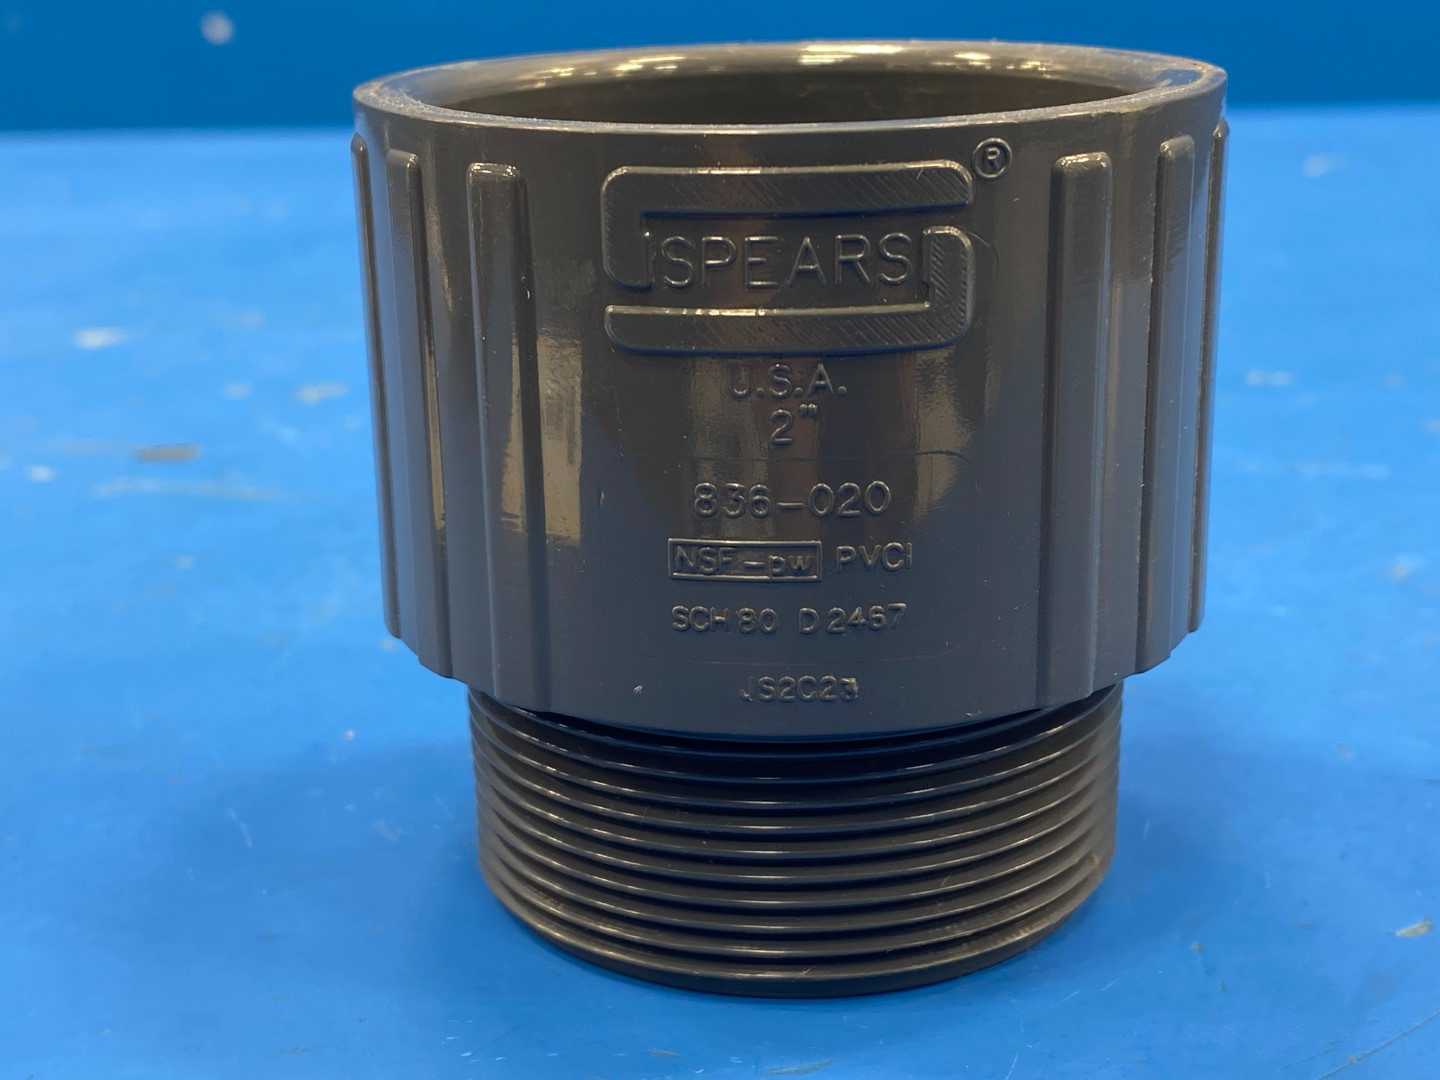 Spears 2" F x M PVC-I Pipe Coupling 836-020